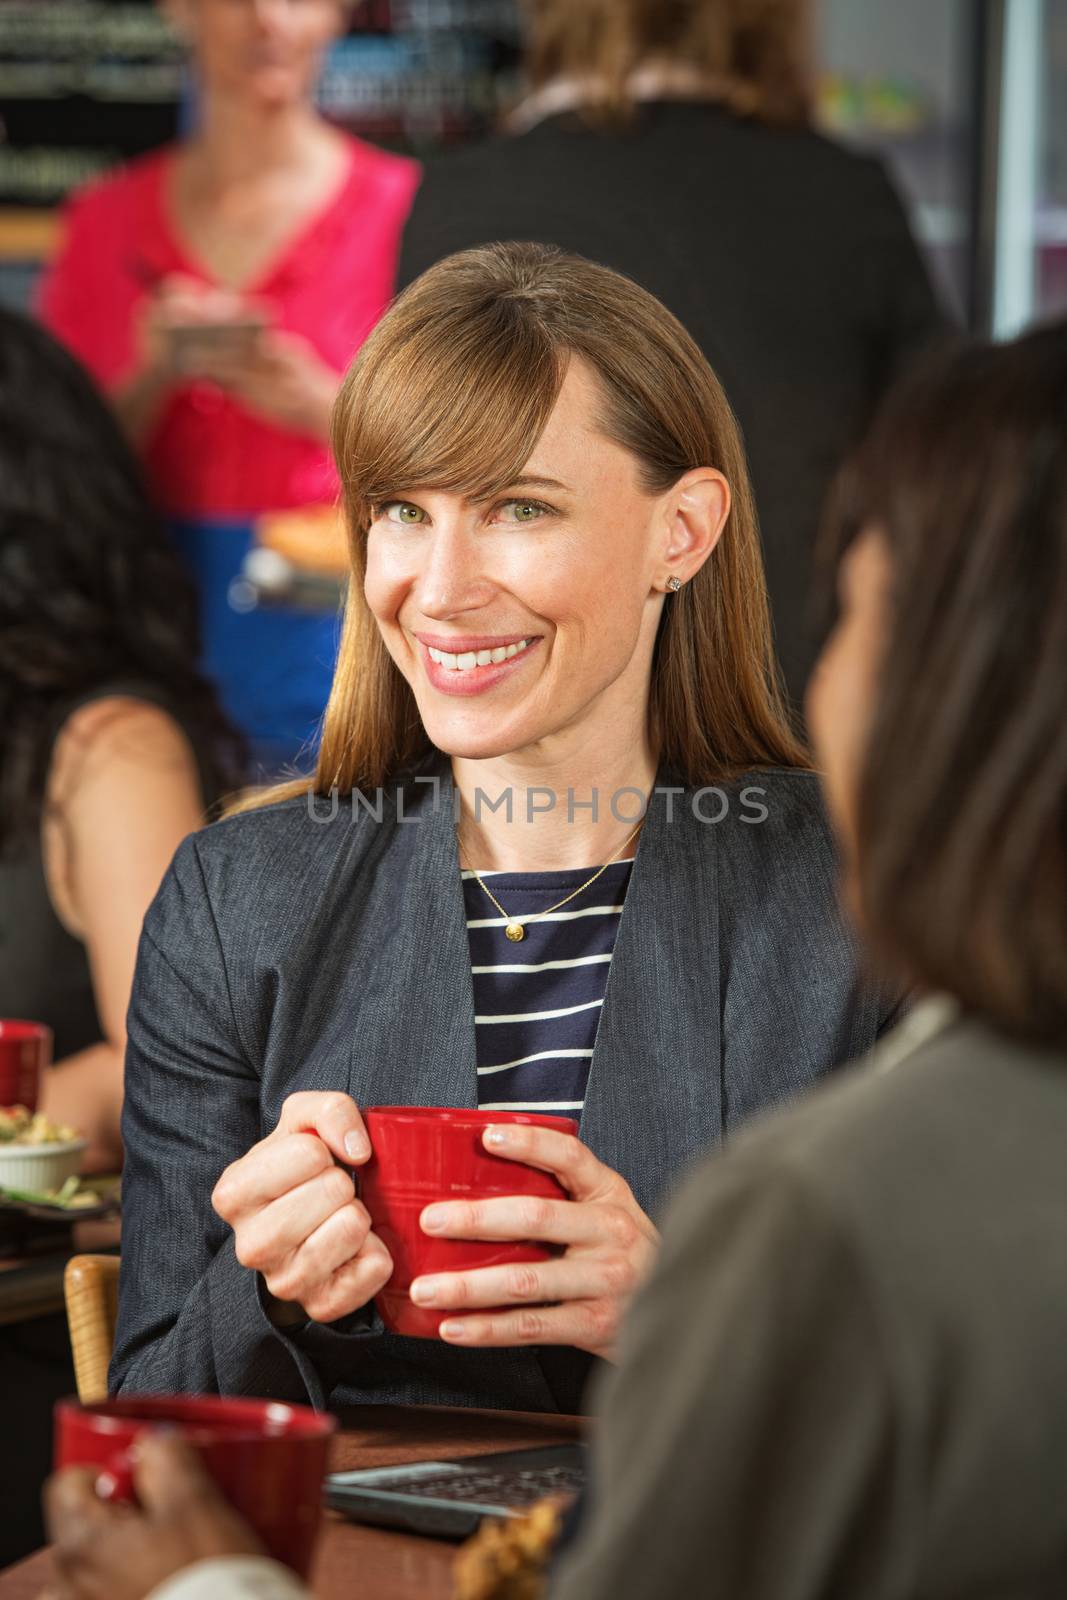 Cheerful Woman in Cafe by Creatista